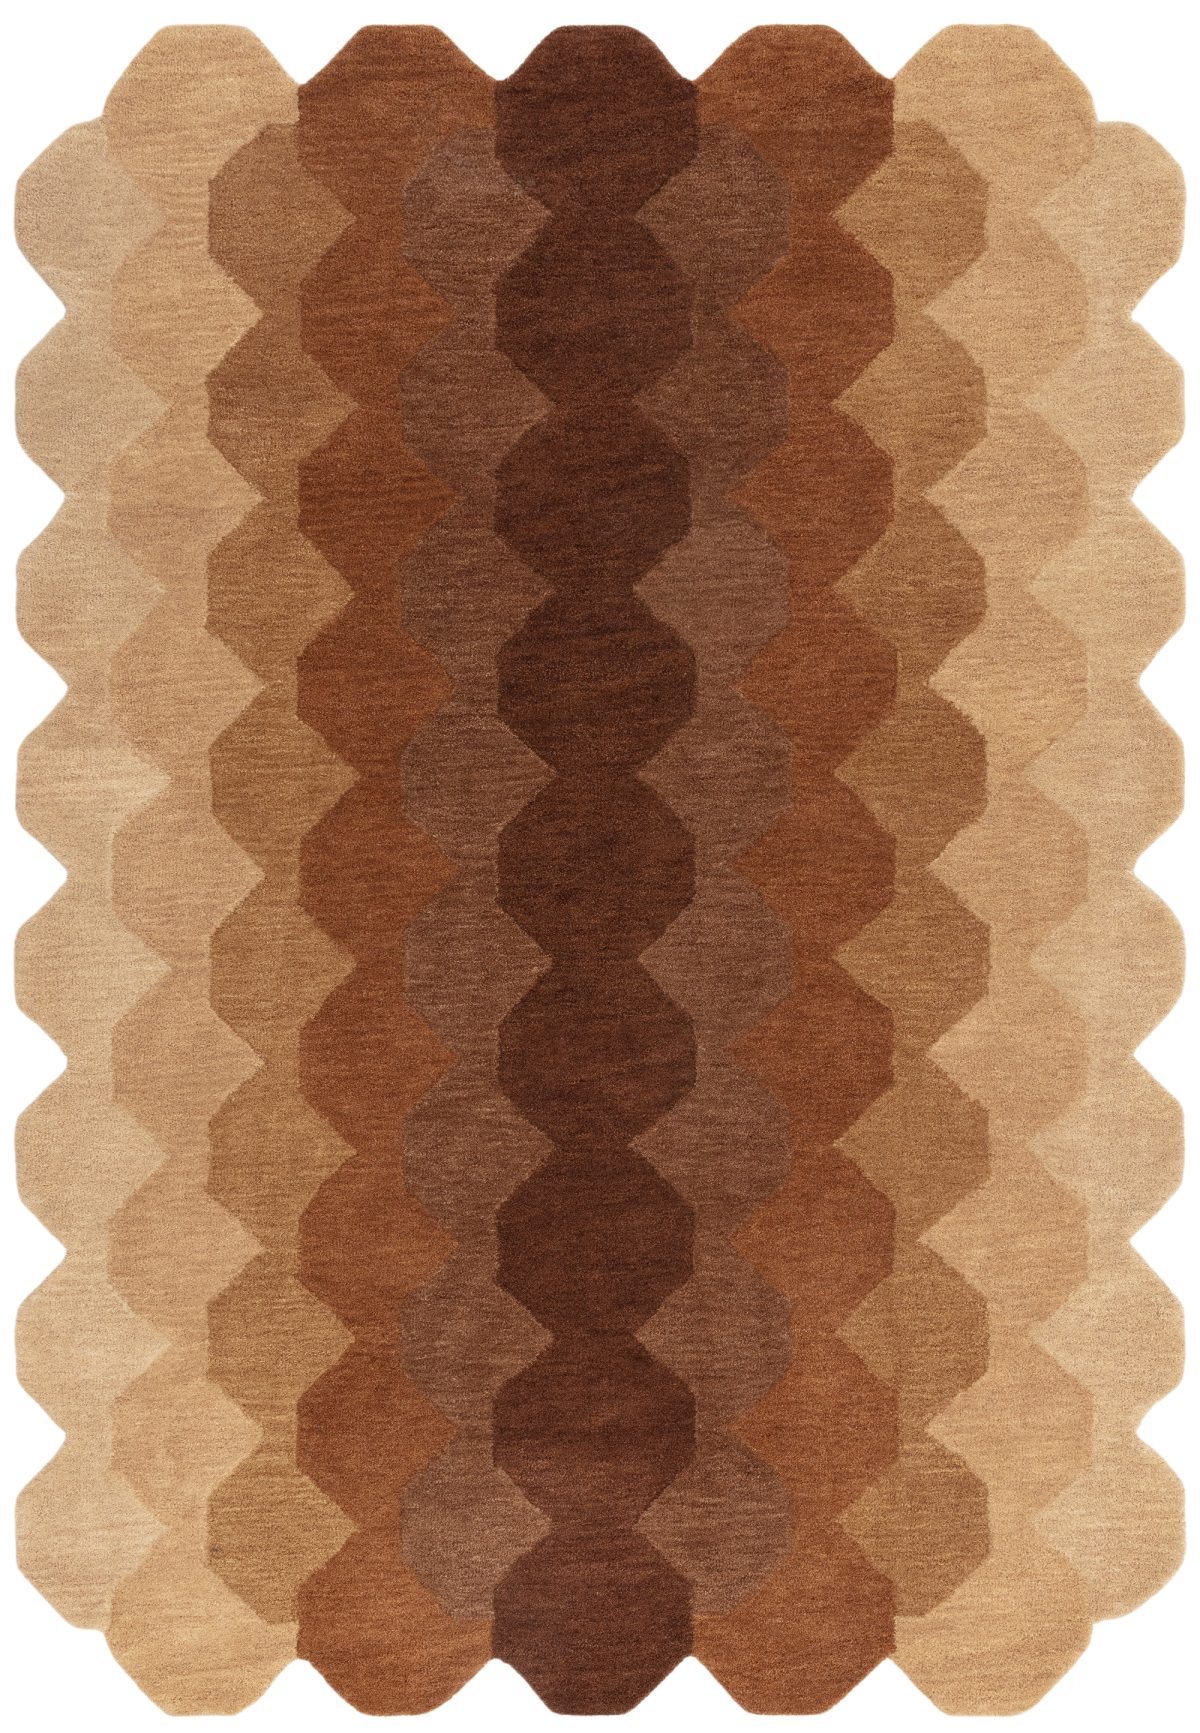 INTRODUCING THE UNIQUE RUG: ARIS IN RUST FROM OUR FLOOR_STORY INTRODUCES COLLECTION